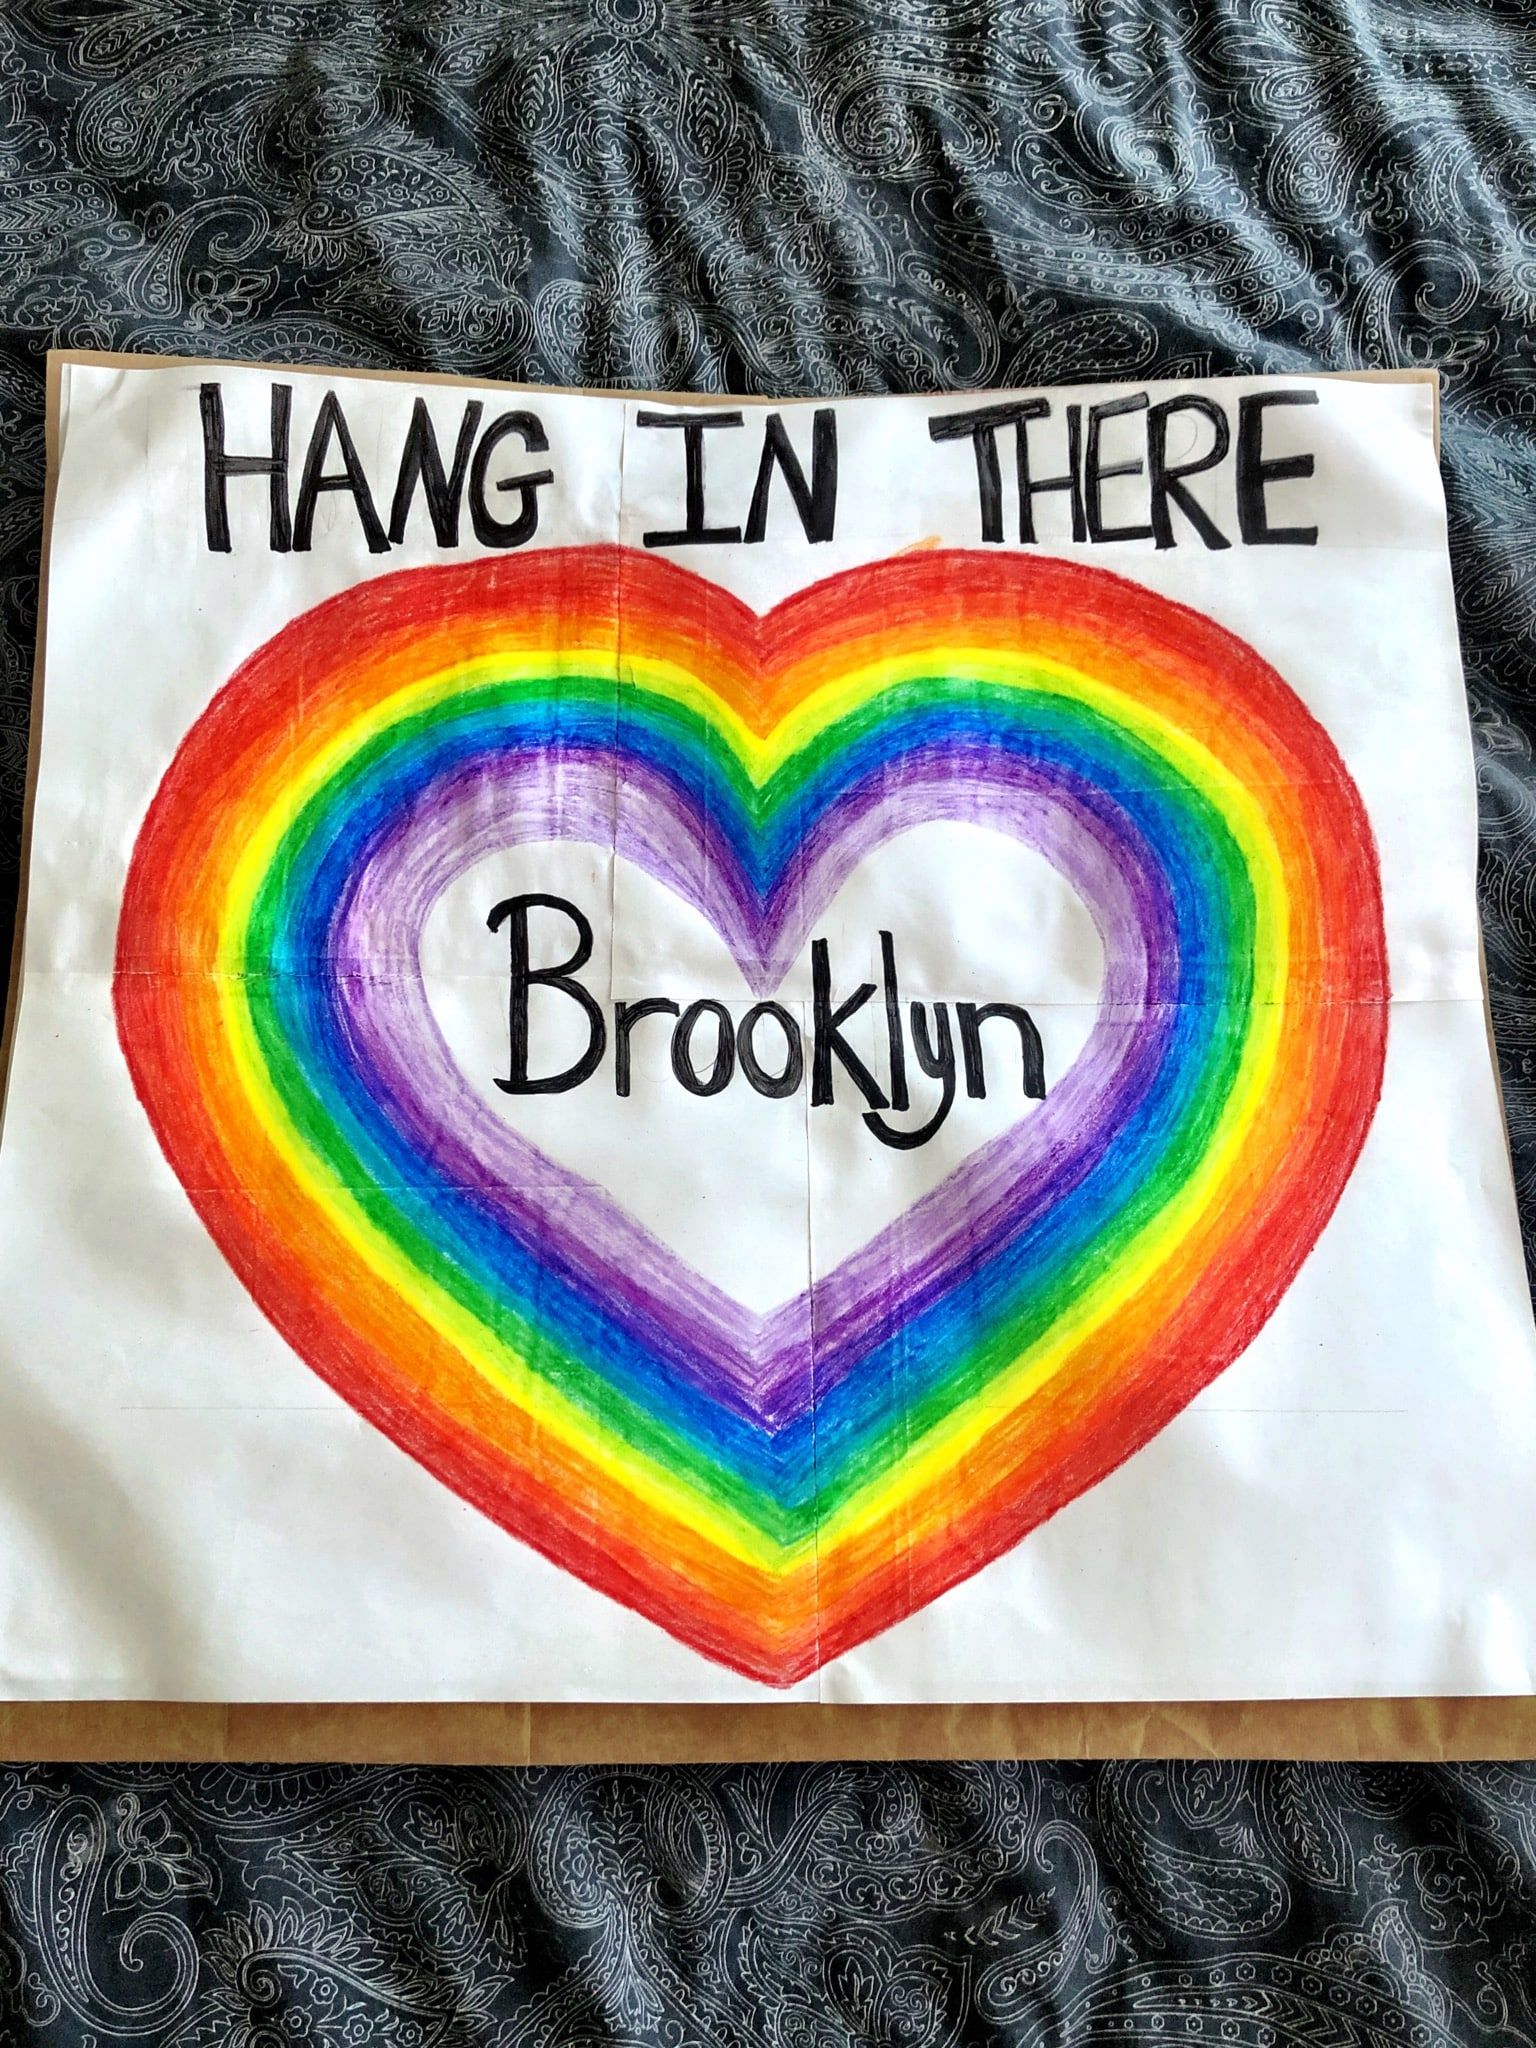 A Rainbow Connects Brooklyn to the World